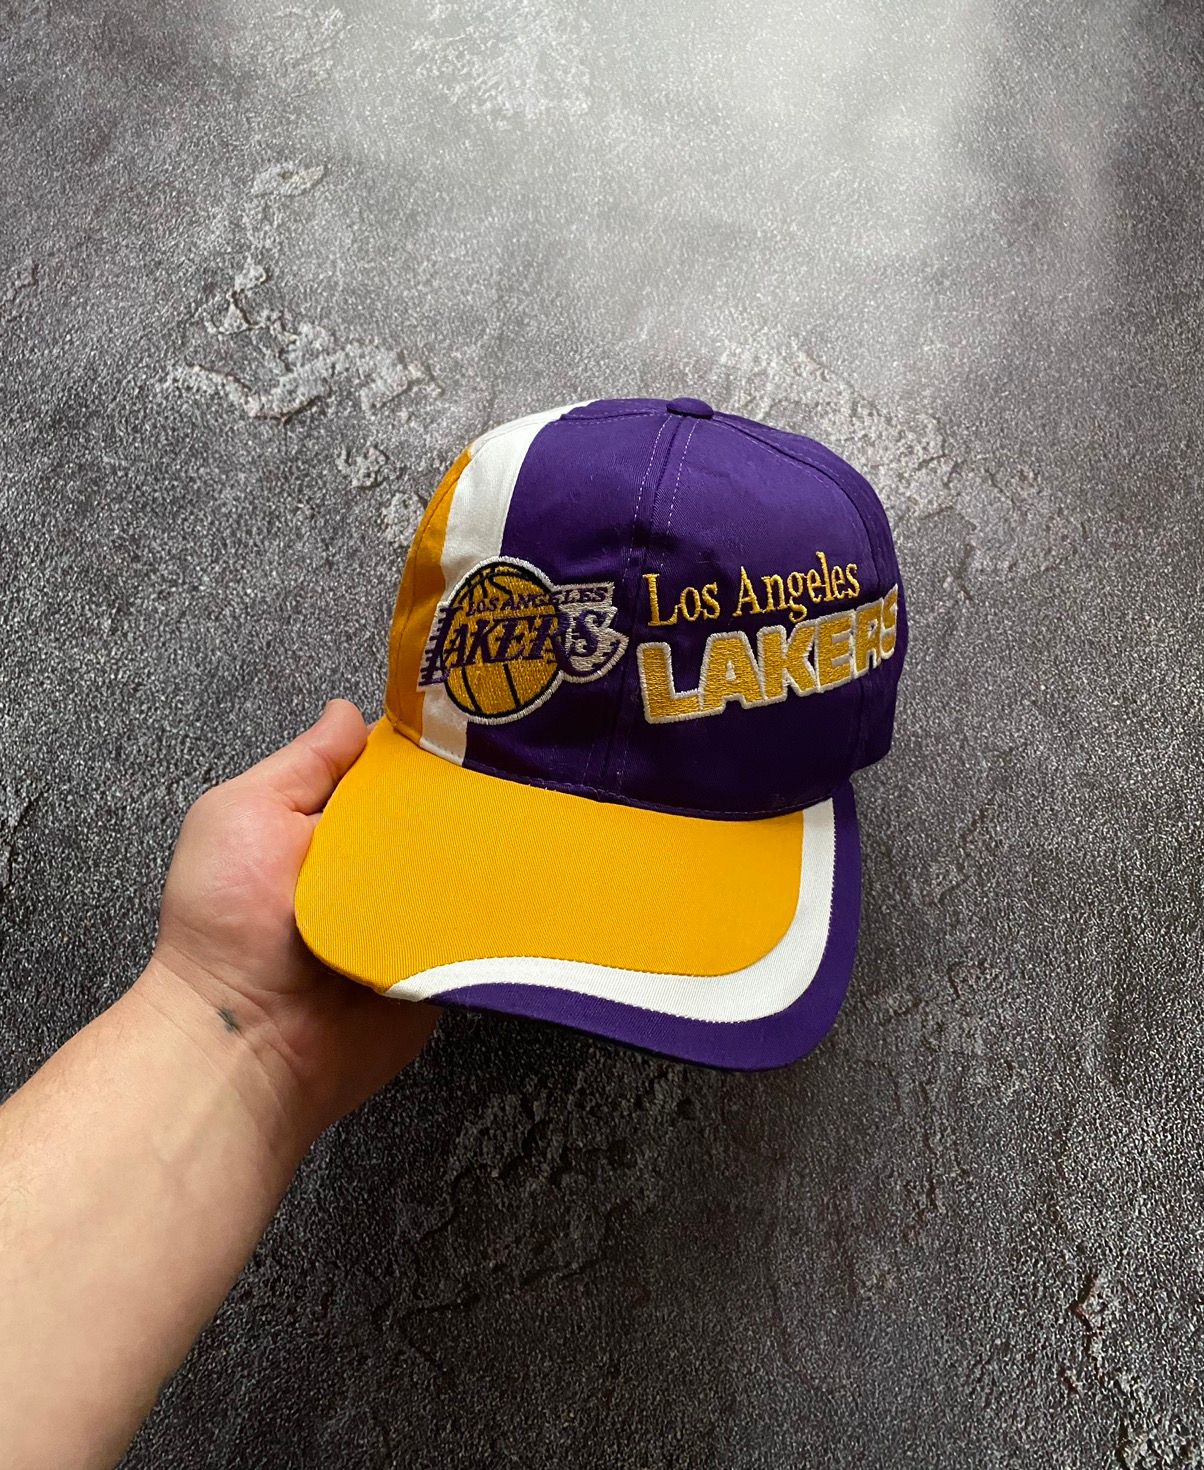 Sports Specialties VTG 90's Los Angeles Lakers NBA Sports ...